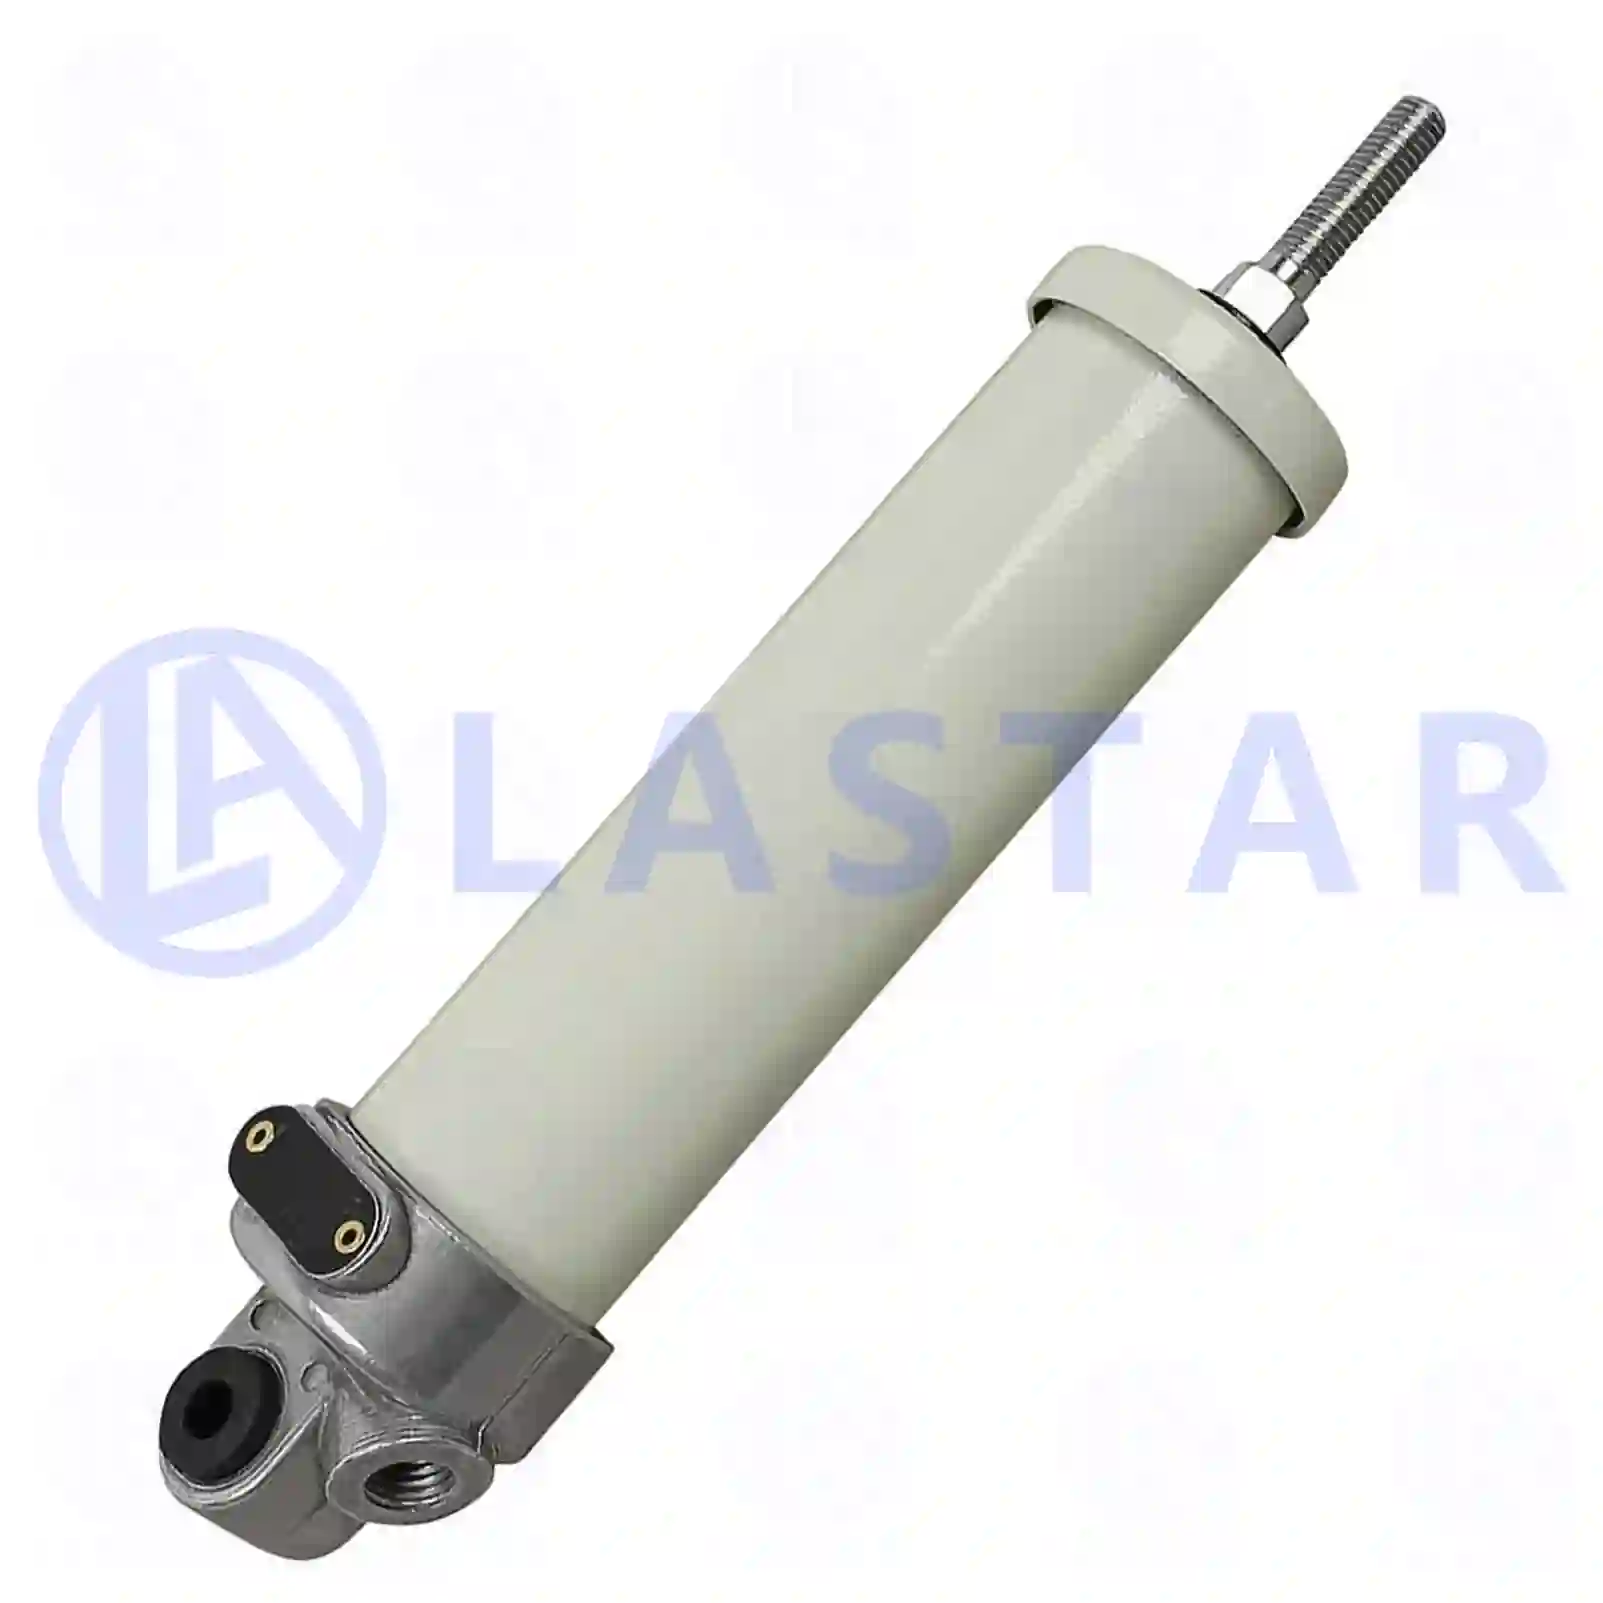  Working cylinder || Lastar Spare Part | Truck Spare Parts, Auotomotive Spare Parts